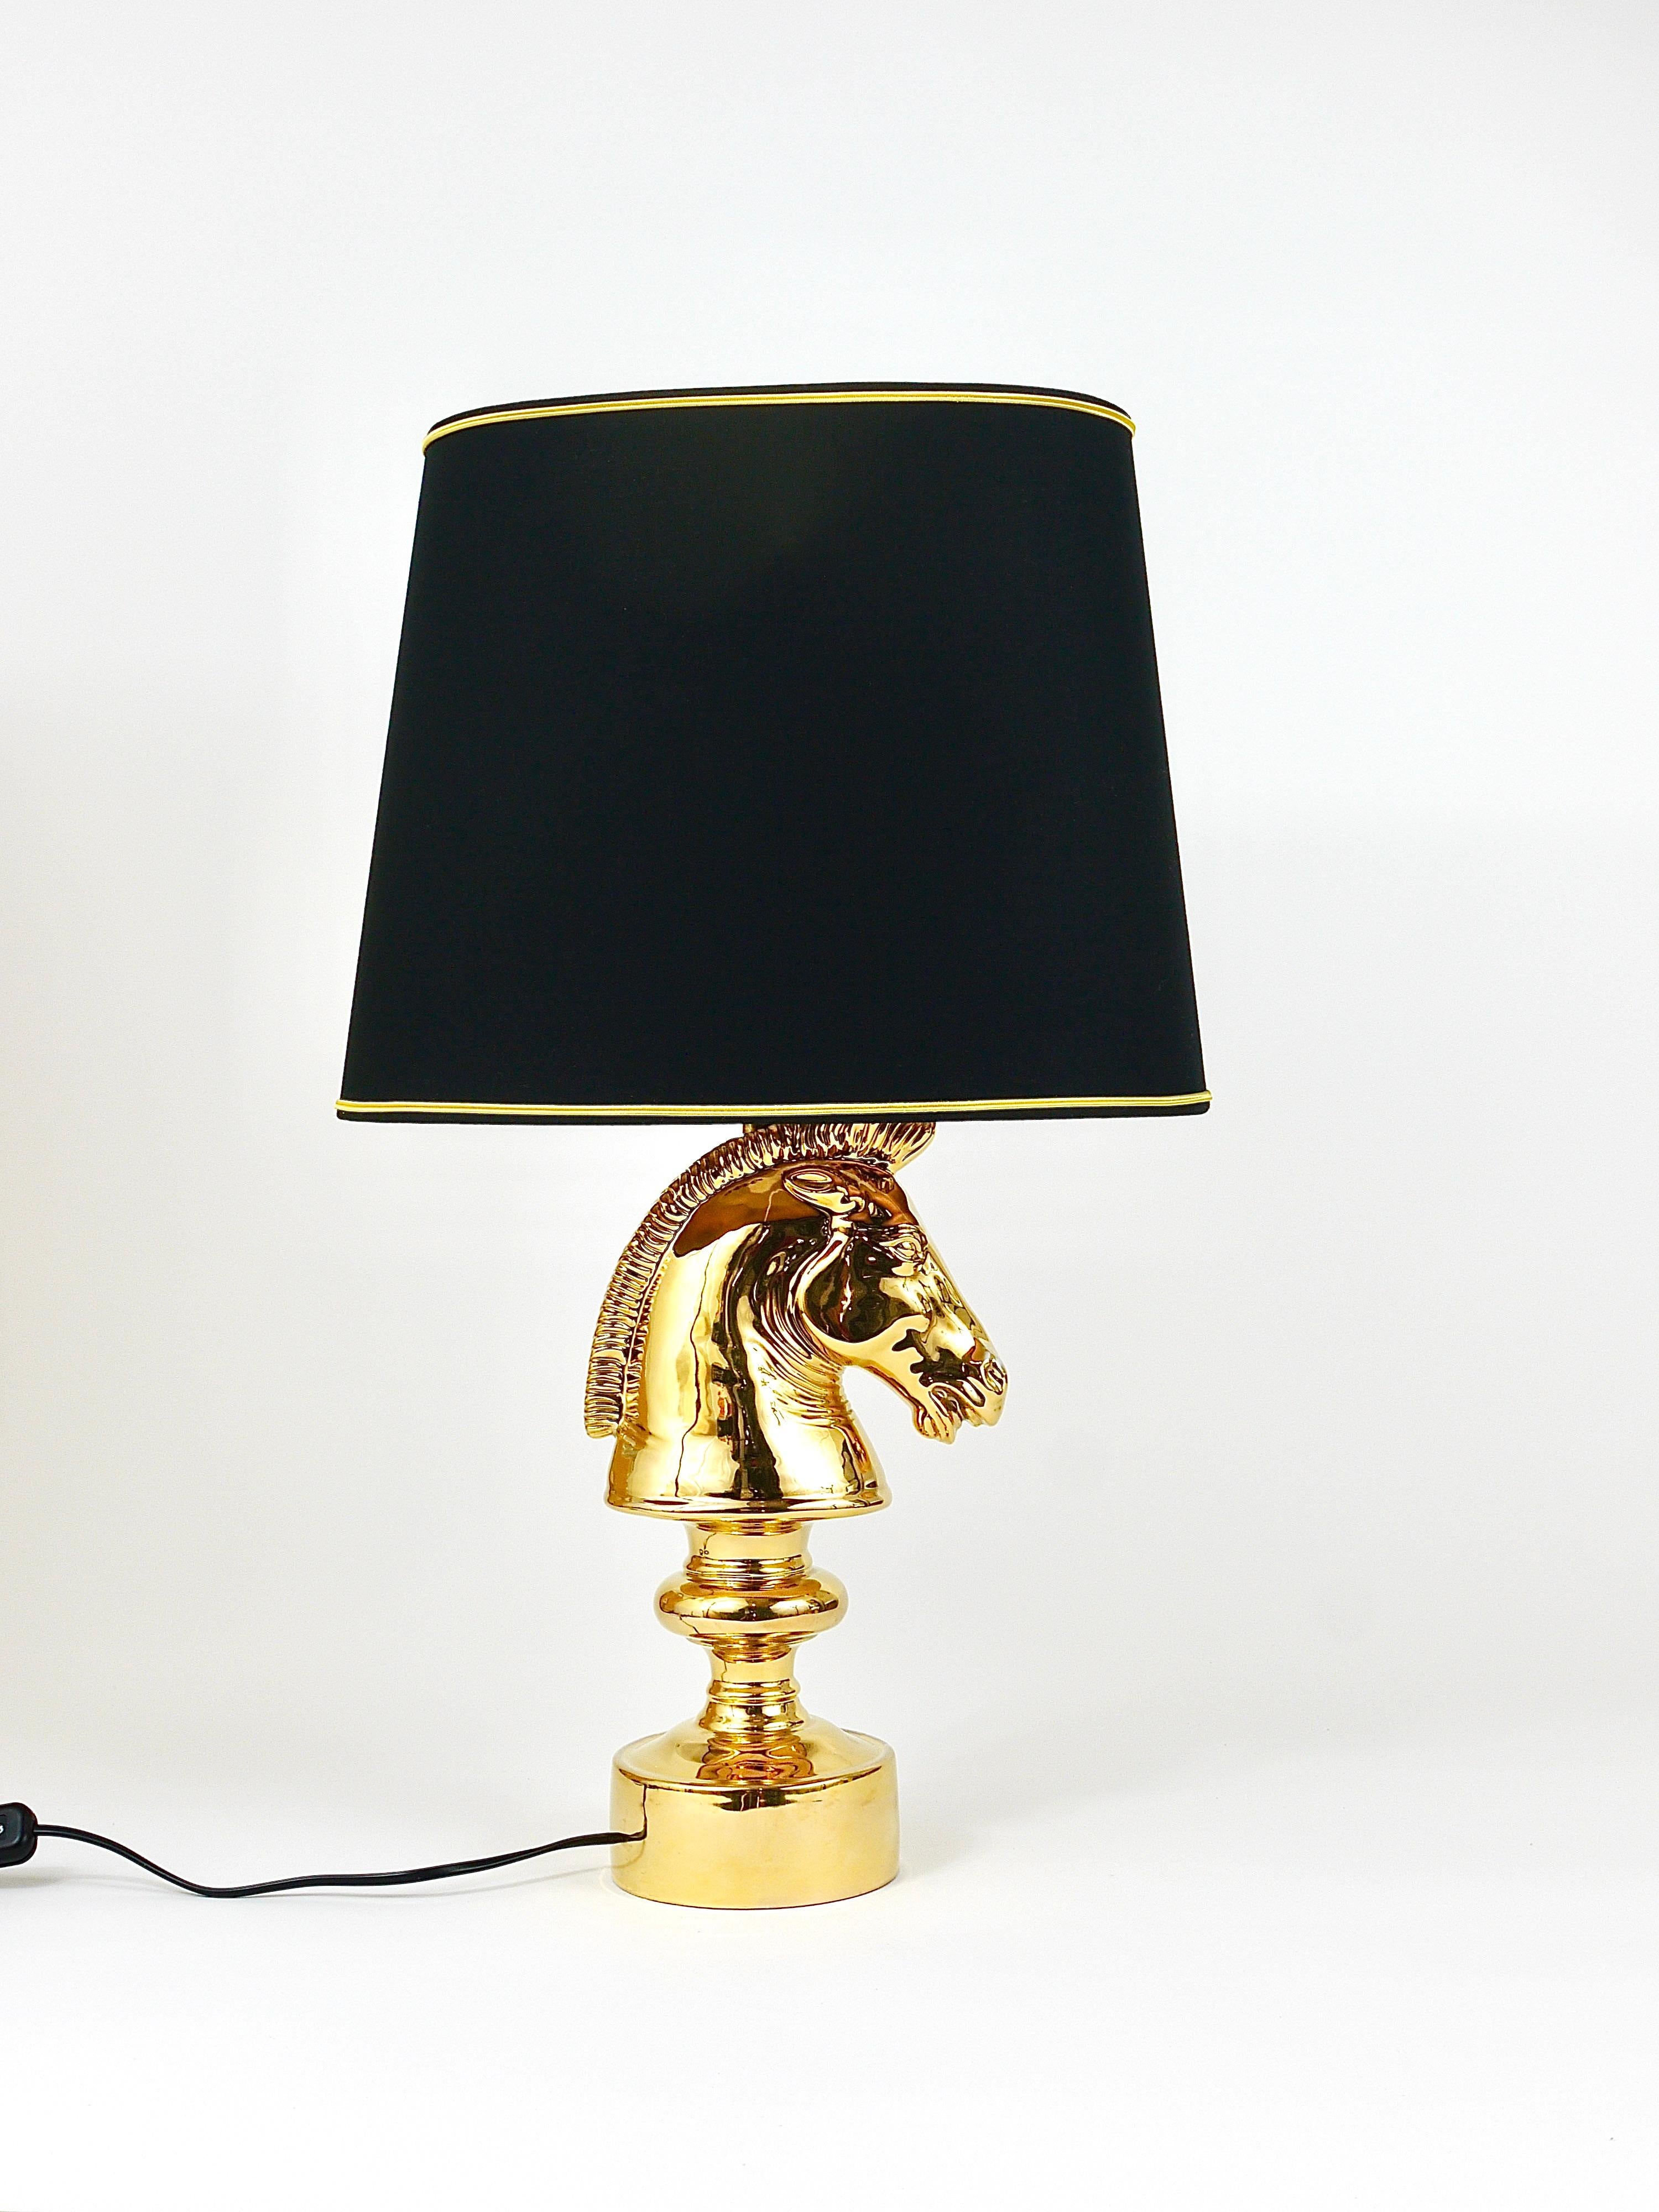 20th Century Golden Hollywood Regency Horse Sculpture Table or Side Lamp, Italy, 1970s For Sale